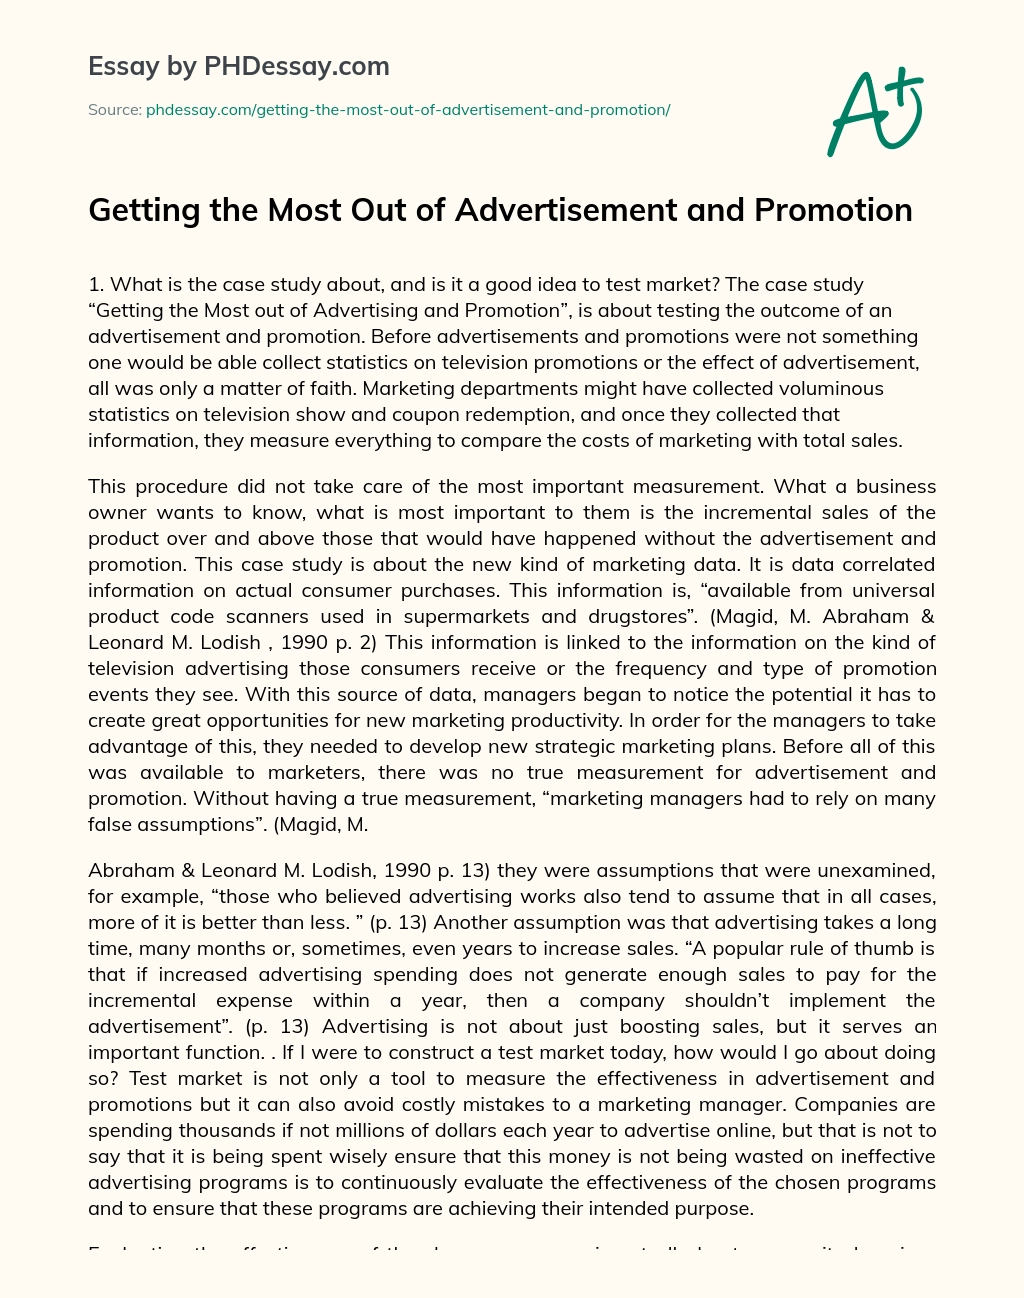 Getting the Most Out of Advertisement and Promotion essay